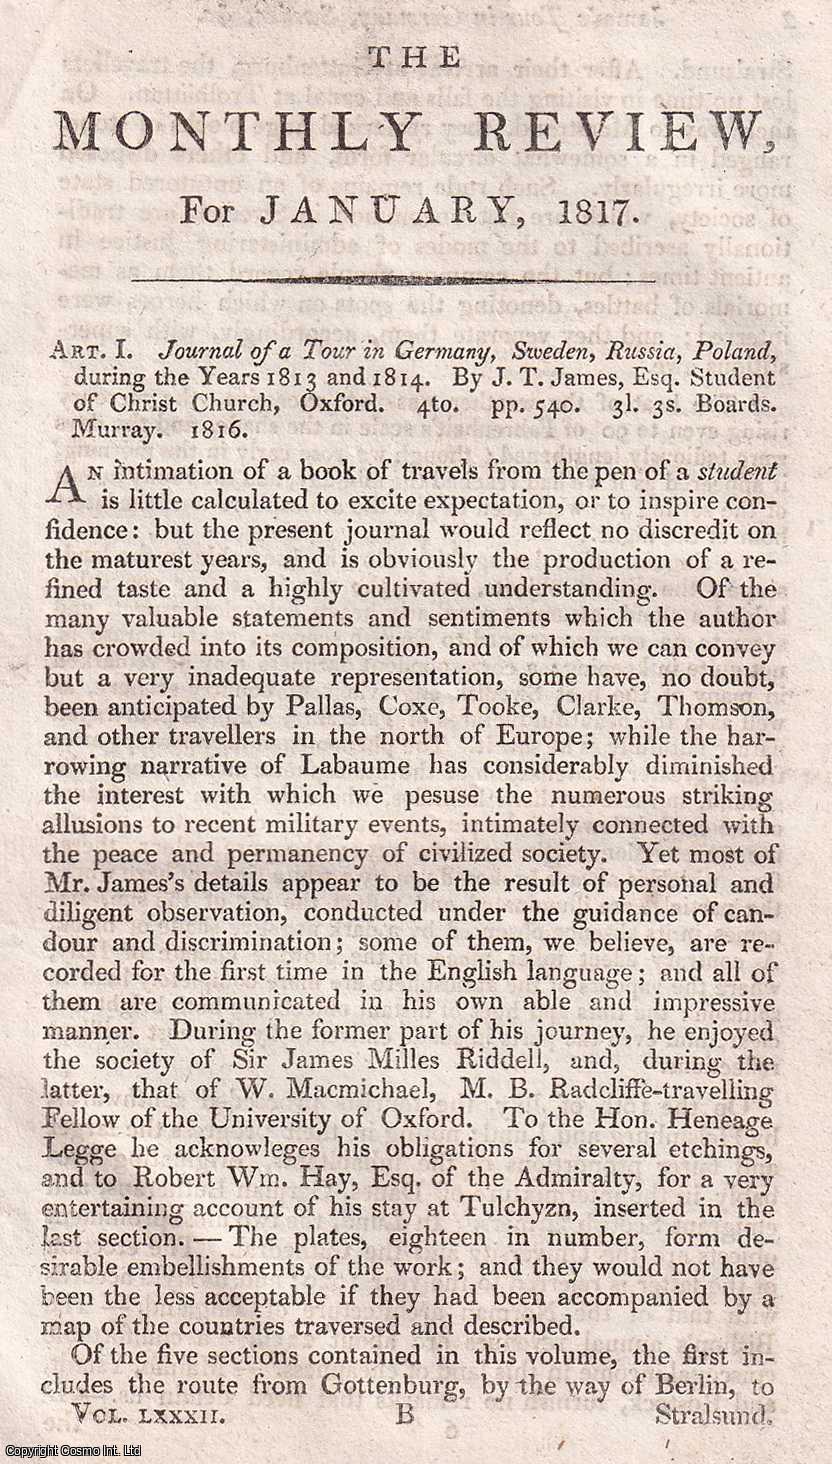 Author Not Stated - Journal of a Tour in Germany, Sweden, Russia, Poland during the years 1813 and 1814, by J.T. James, Esq., Student of Christ Church, Oxford. An original essay from the Monthly Review, 1817. No author is given for this article.